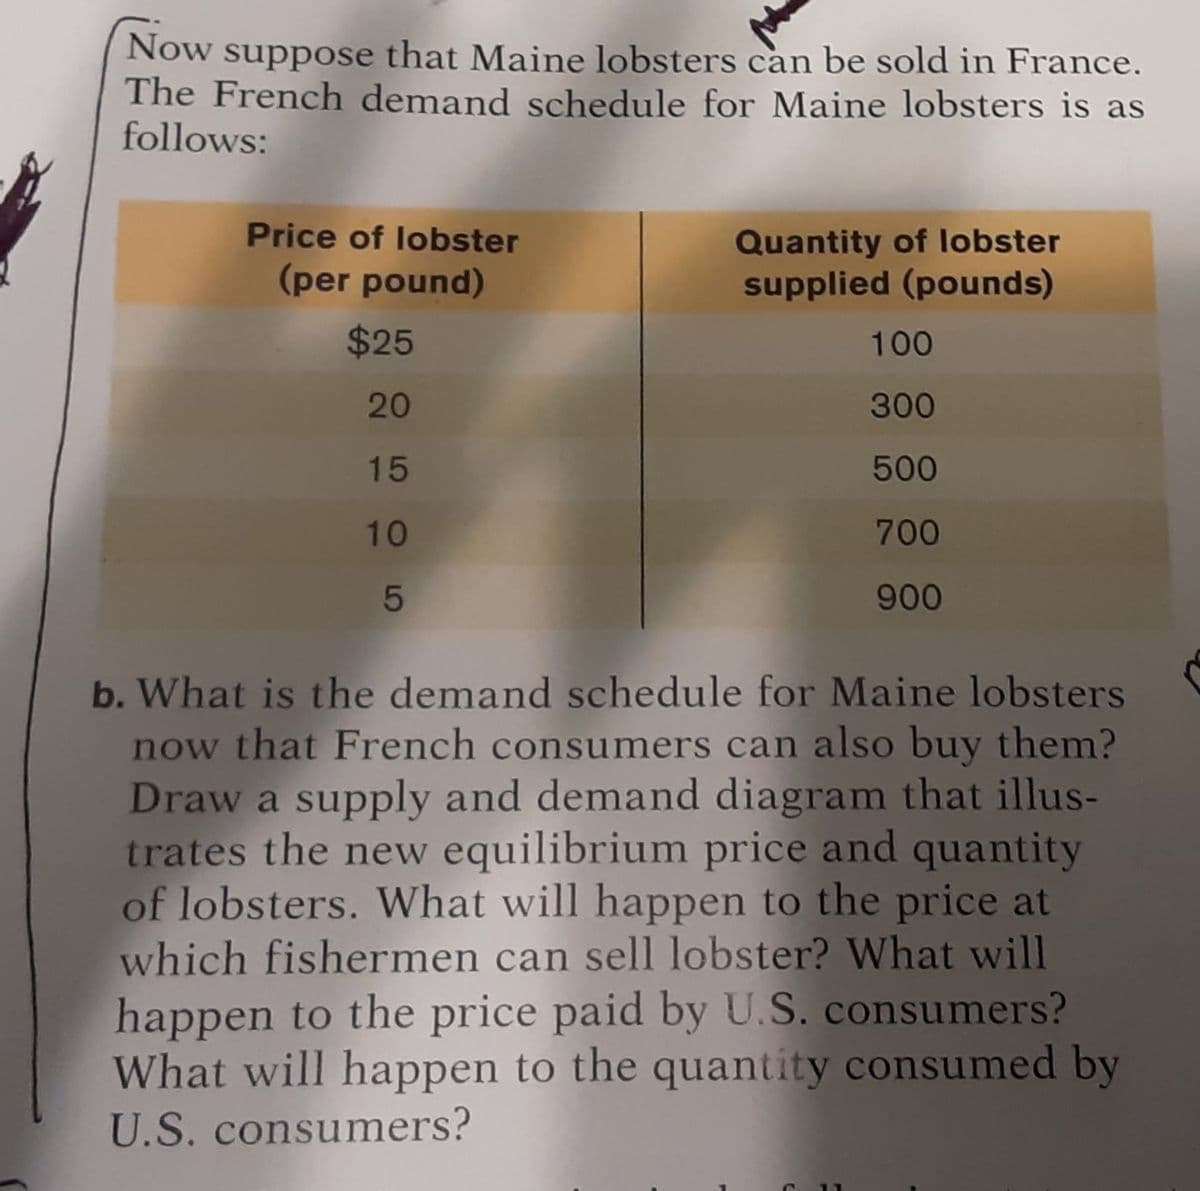 Now suppose that Maine lobsters can be sold in France.
The French demand schedule for Maine lobsters is as
follows:
Price of lobster
Quantity of lobster
supplied (pounds)
(per pound)
$25
100
20
300
15
500
10
700
900
b. What is the demand schedule for Maine lobsters
now that French consumers can also buy them?
Draw a supply and demand diagram that illus-
trates the new equilibrium price and quantity
of lobsters. What will happen to the price at
which fishermen can sell lobster? What will
happen to the price paid by U.S. consumers?
What will happen to the quantity consumed by
U.S. consumers?
